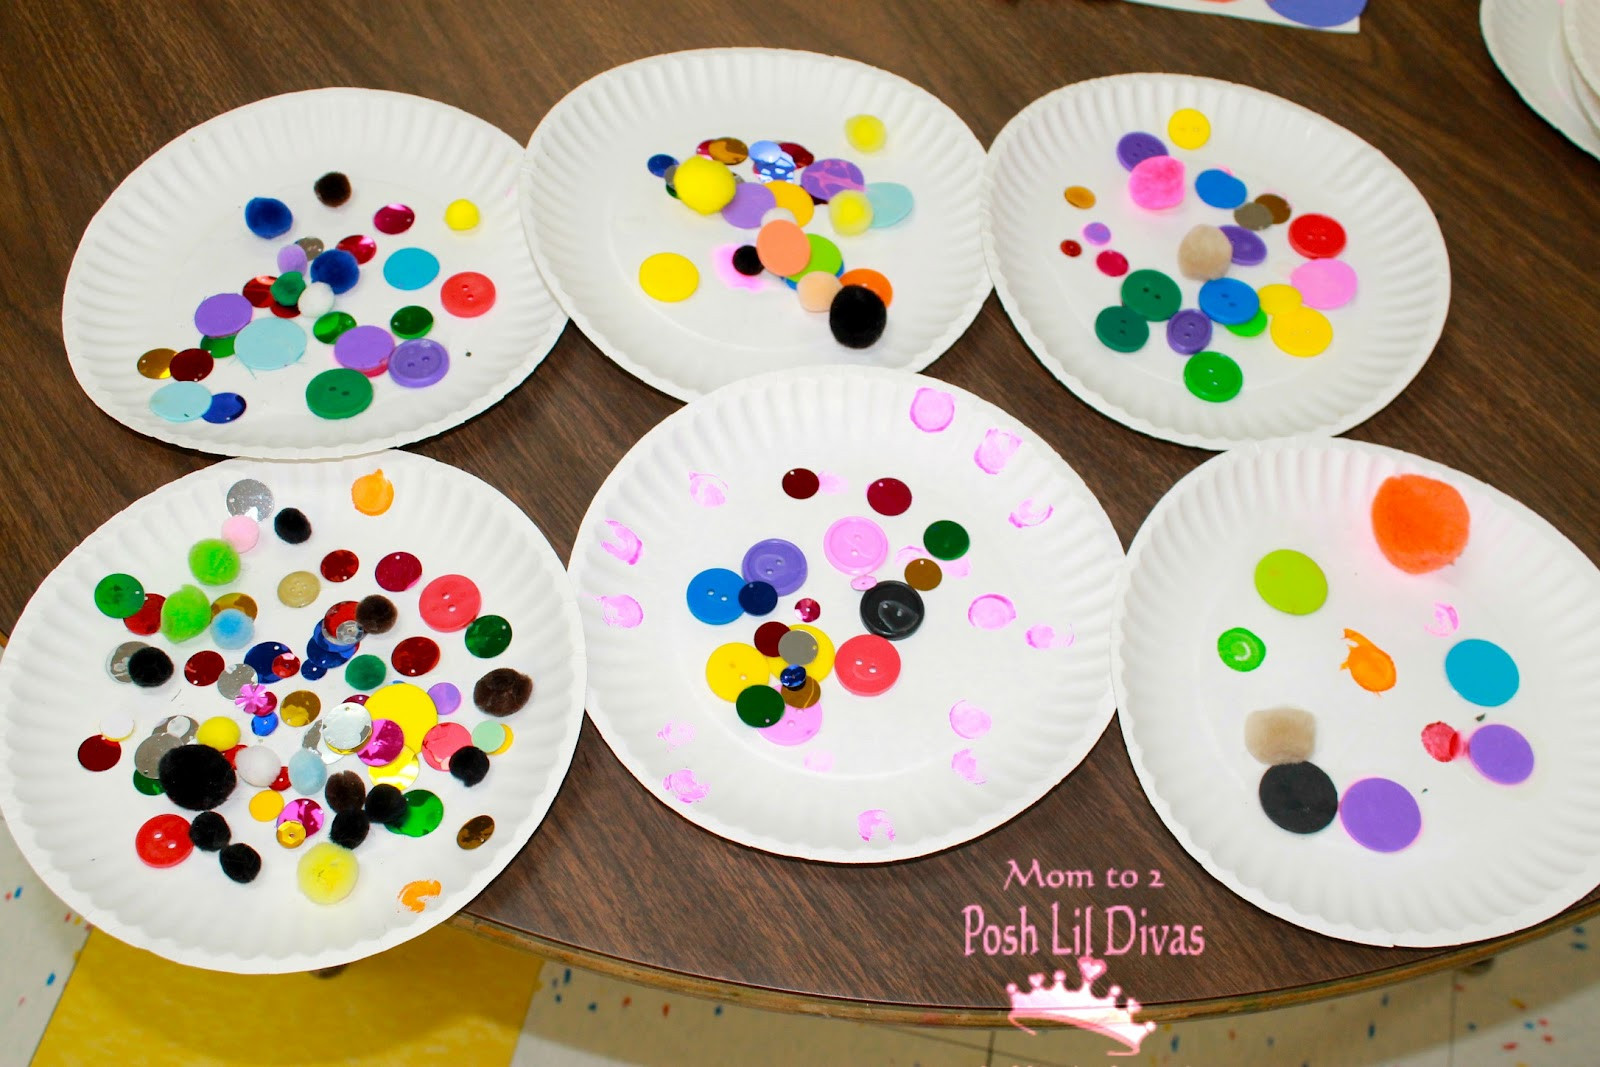 Craft Activities For Preschoolers
 They distinguished between circles vs squares